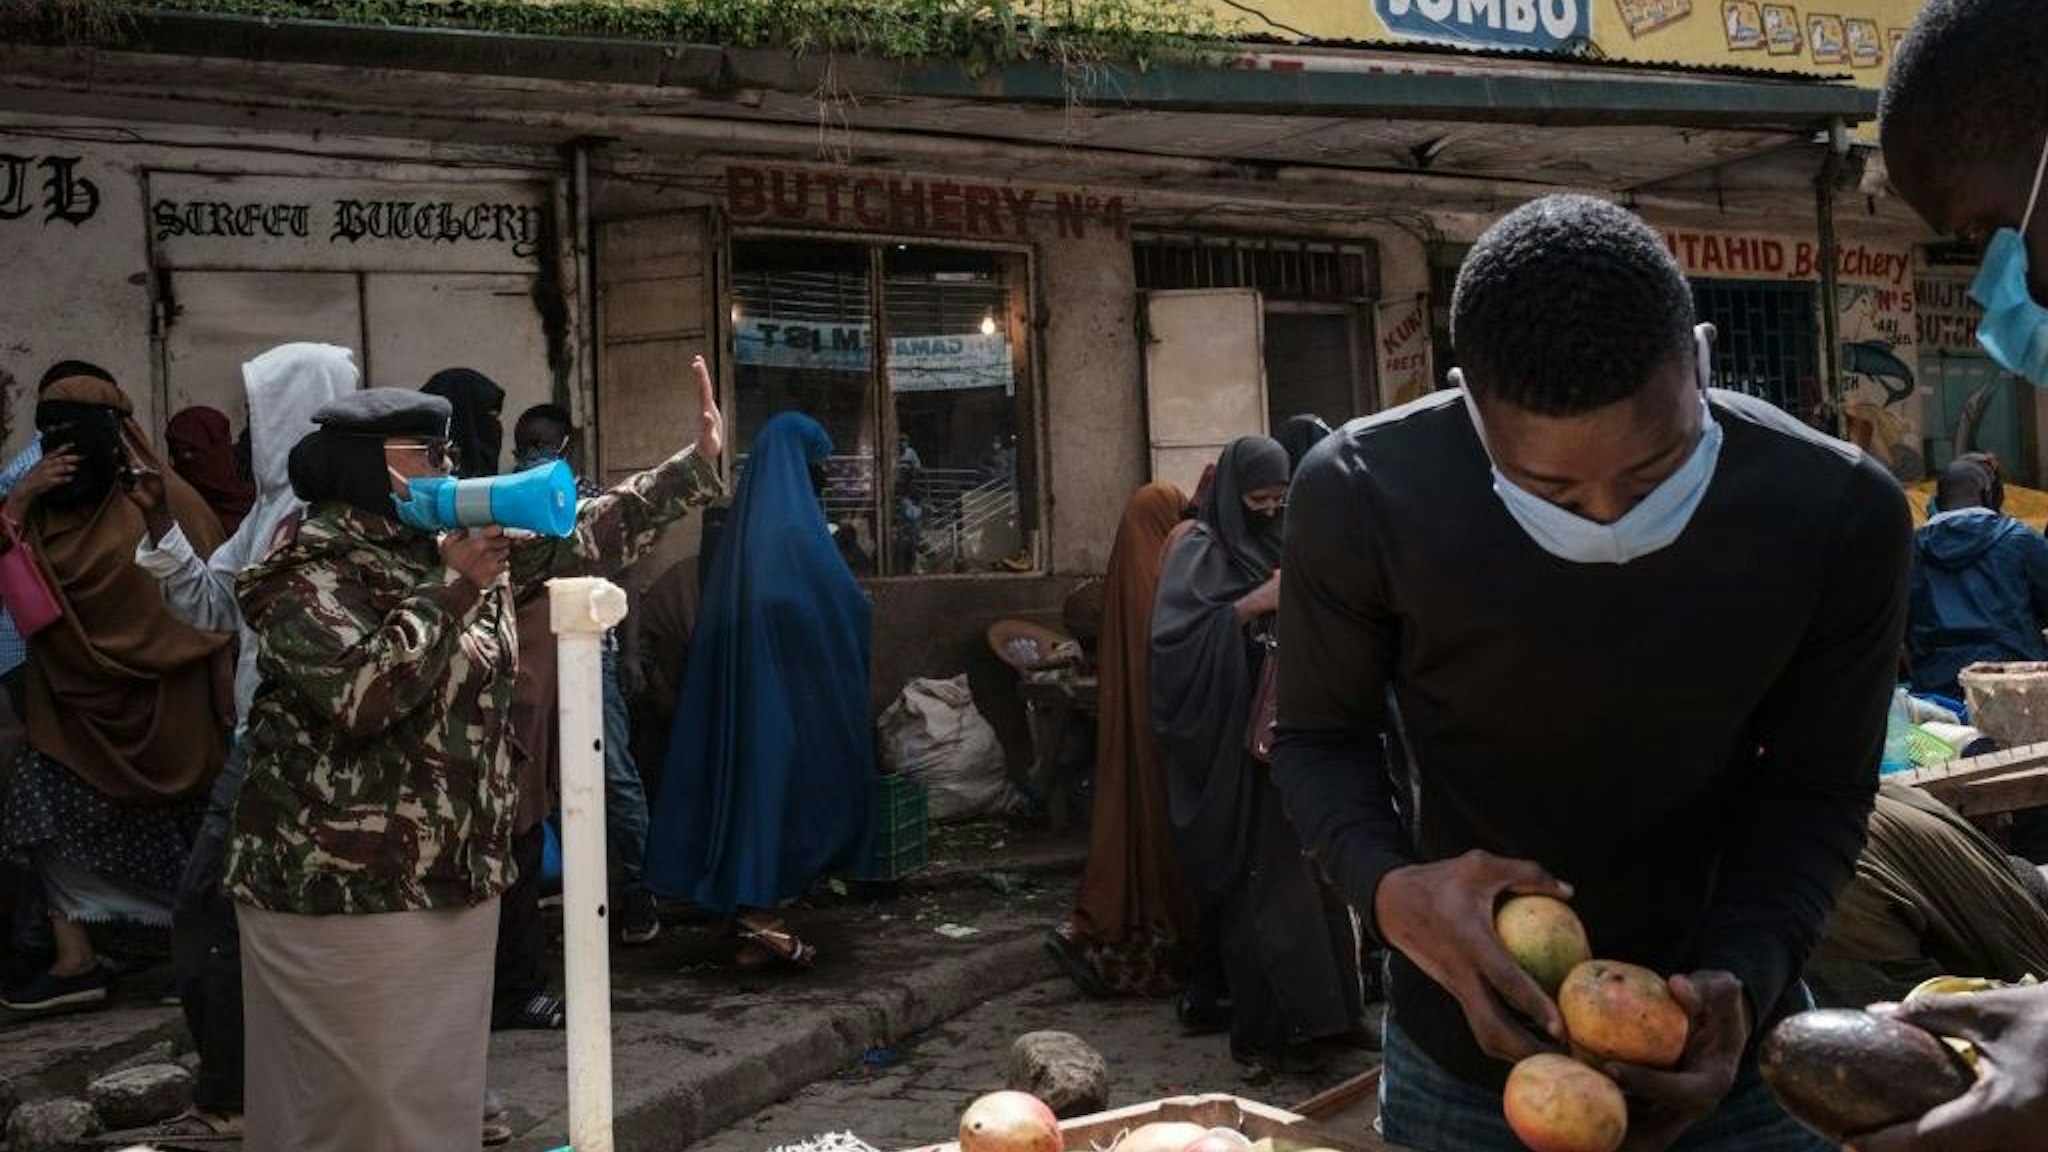 Police officers request all street vendors to close and leave to curb the spread of COVID-19 coronavirus as they emphasise the menace of the COVID-19 coronavirus in Eastleigh, a predominantly Muslim Somali neighbourhood, in Nairobi, Kenya, on April 24, 2020. (Photo by Yasuyoshi CHIBA / AFP)